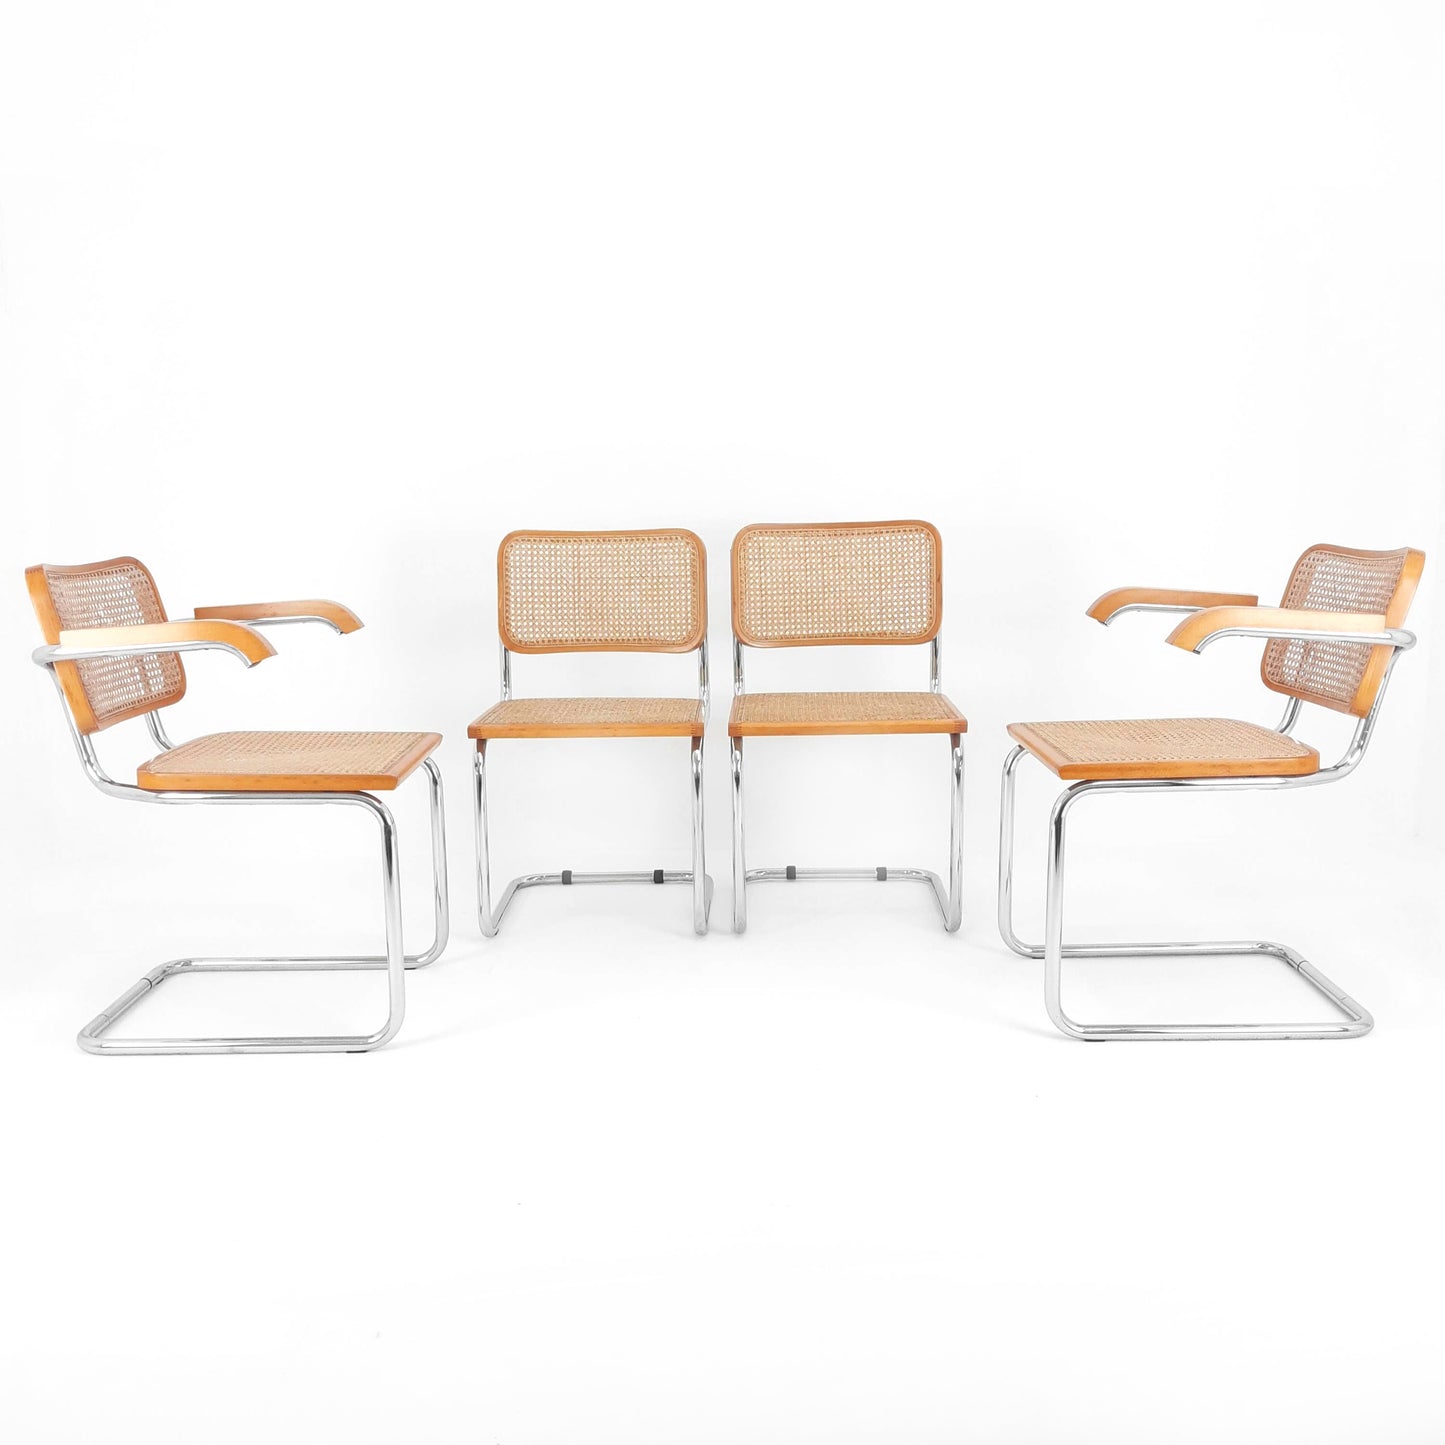 Marcel Breuer Cesca Style Cantilevered Chairs x4 - Rattan and Tubular Steel - Mid Century